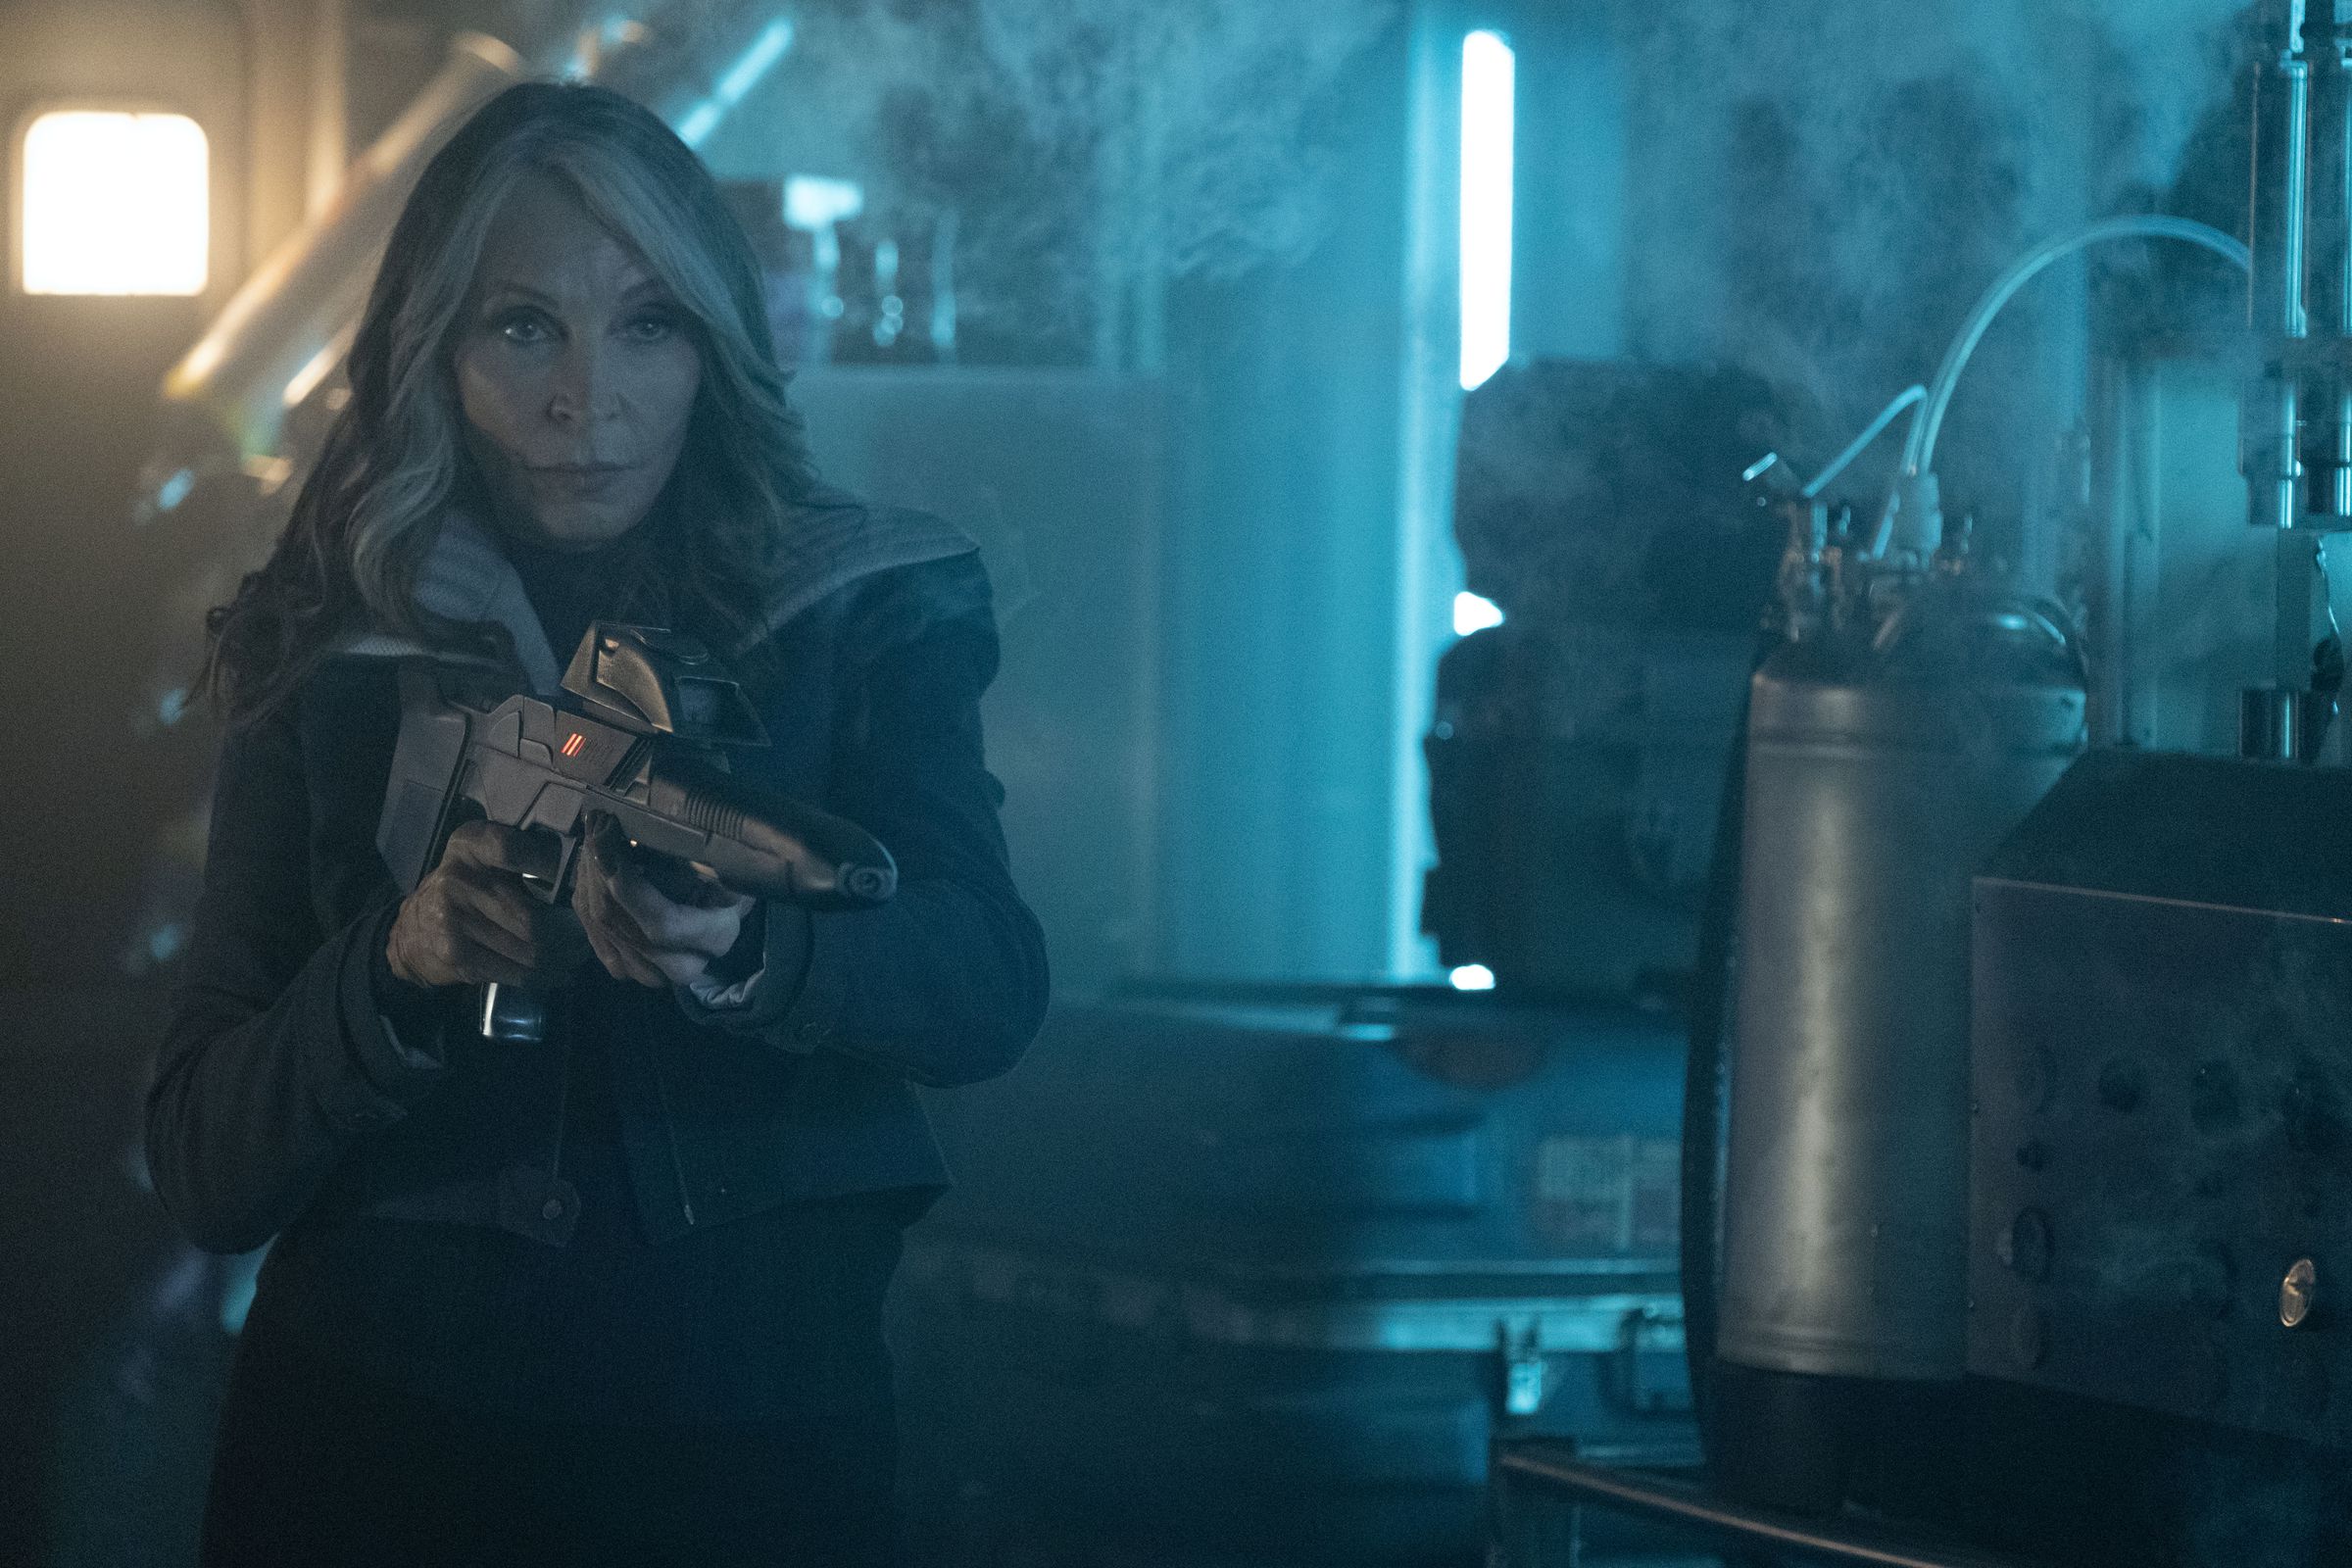 An older woman points a phase rifle at someone off-screen.